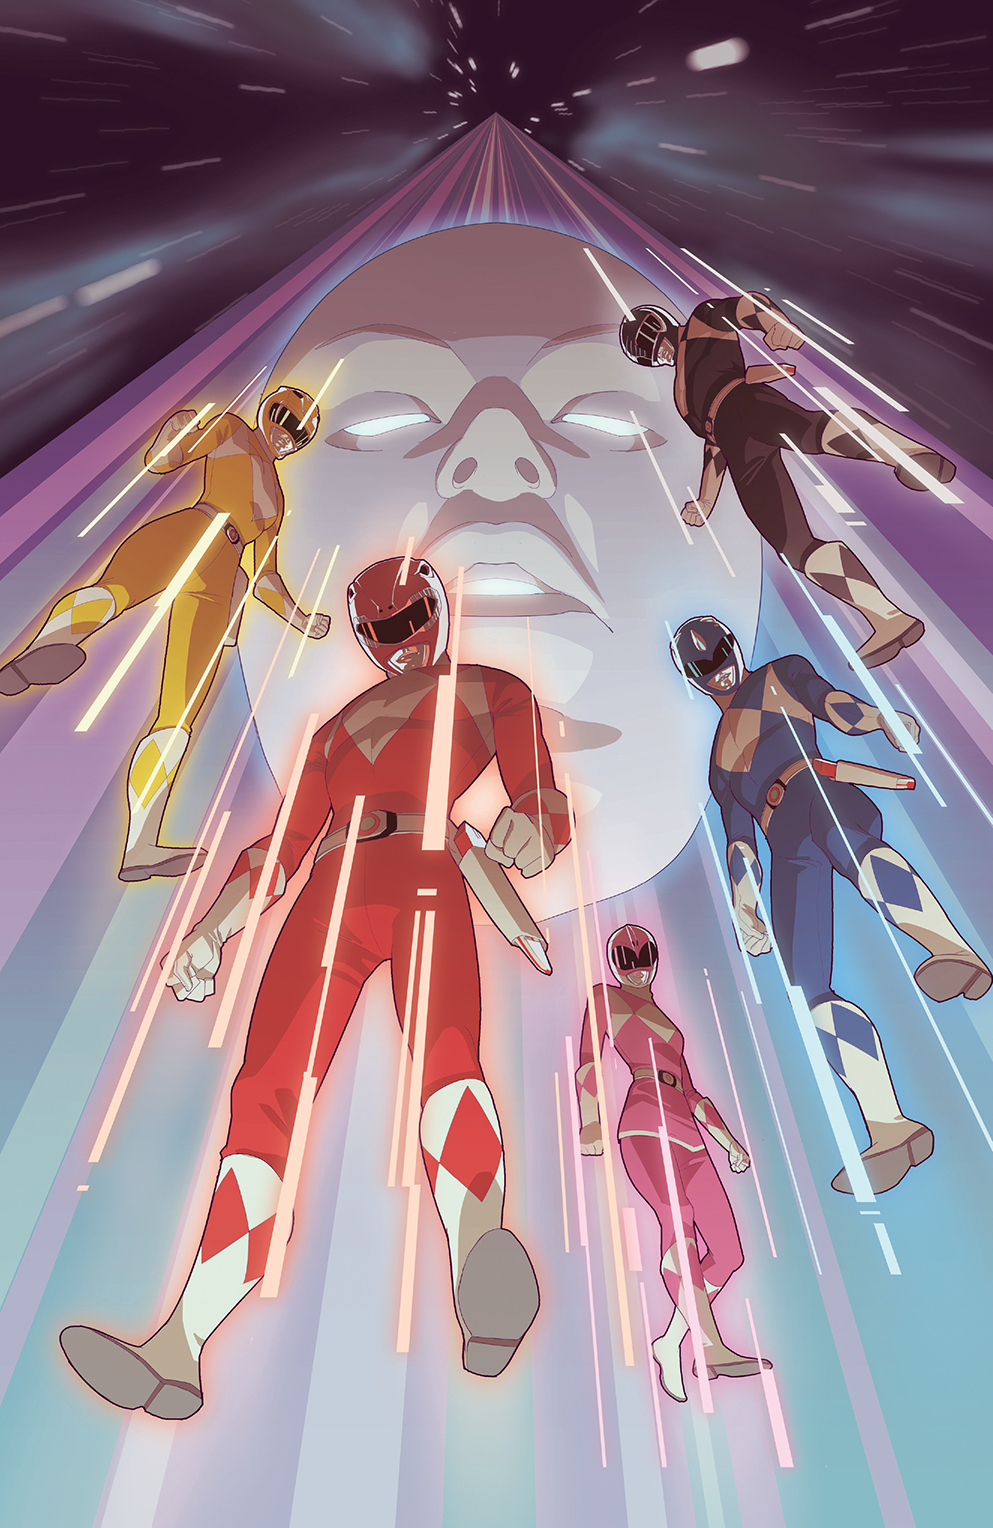 Mighty Morphin Power Rangers 2016 Annual #1 Review